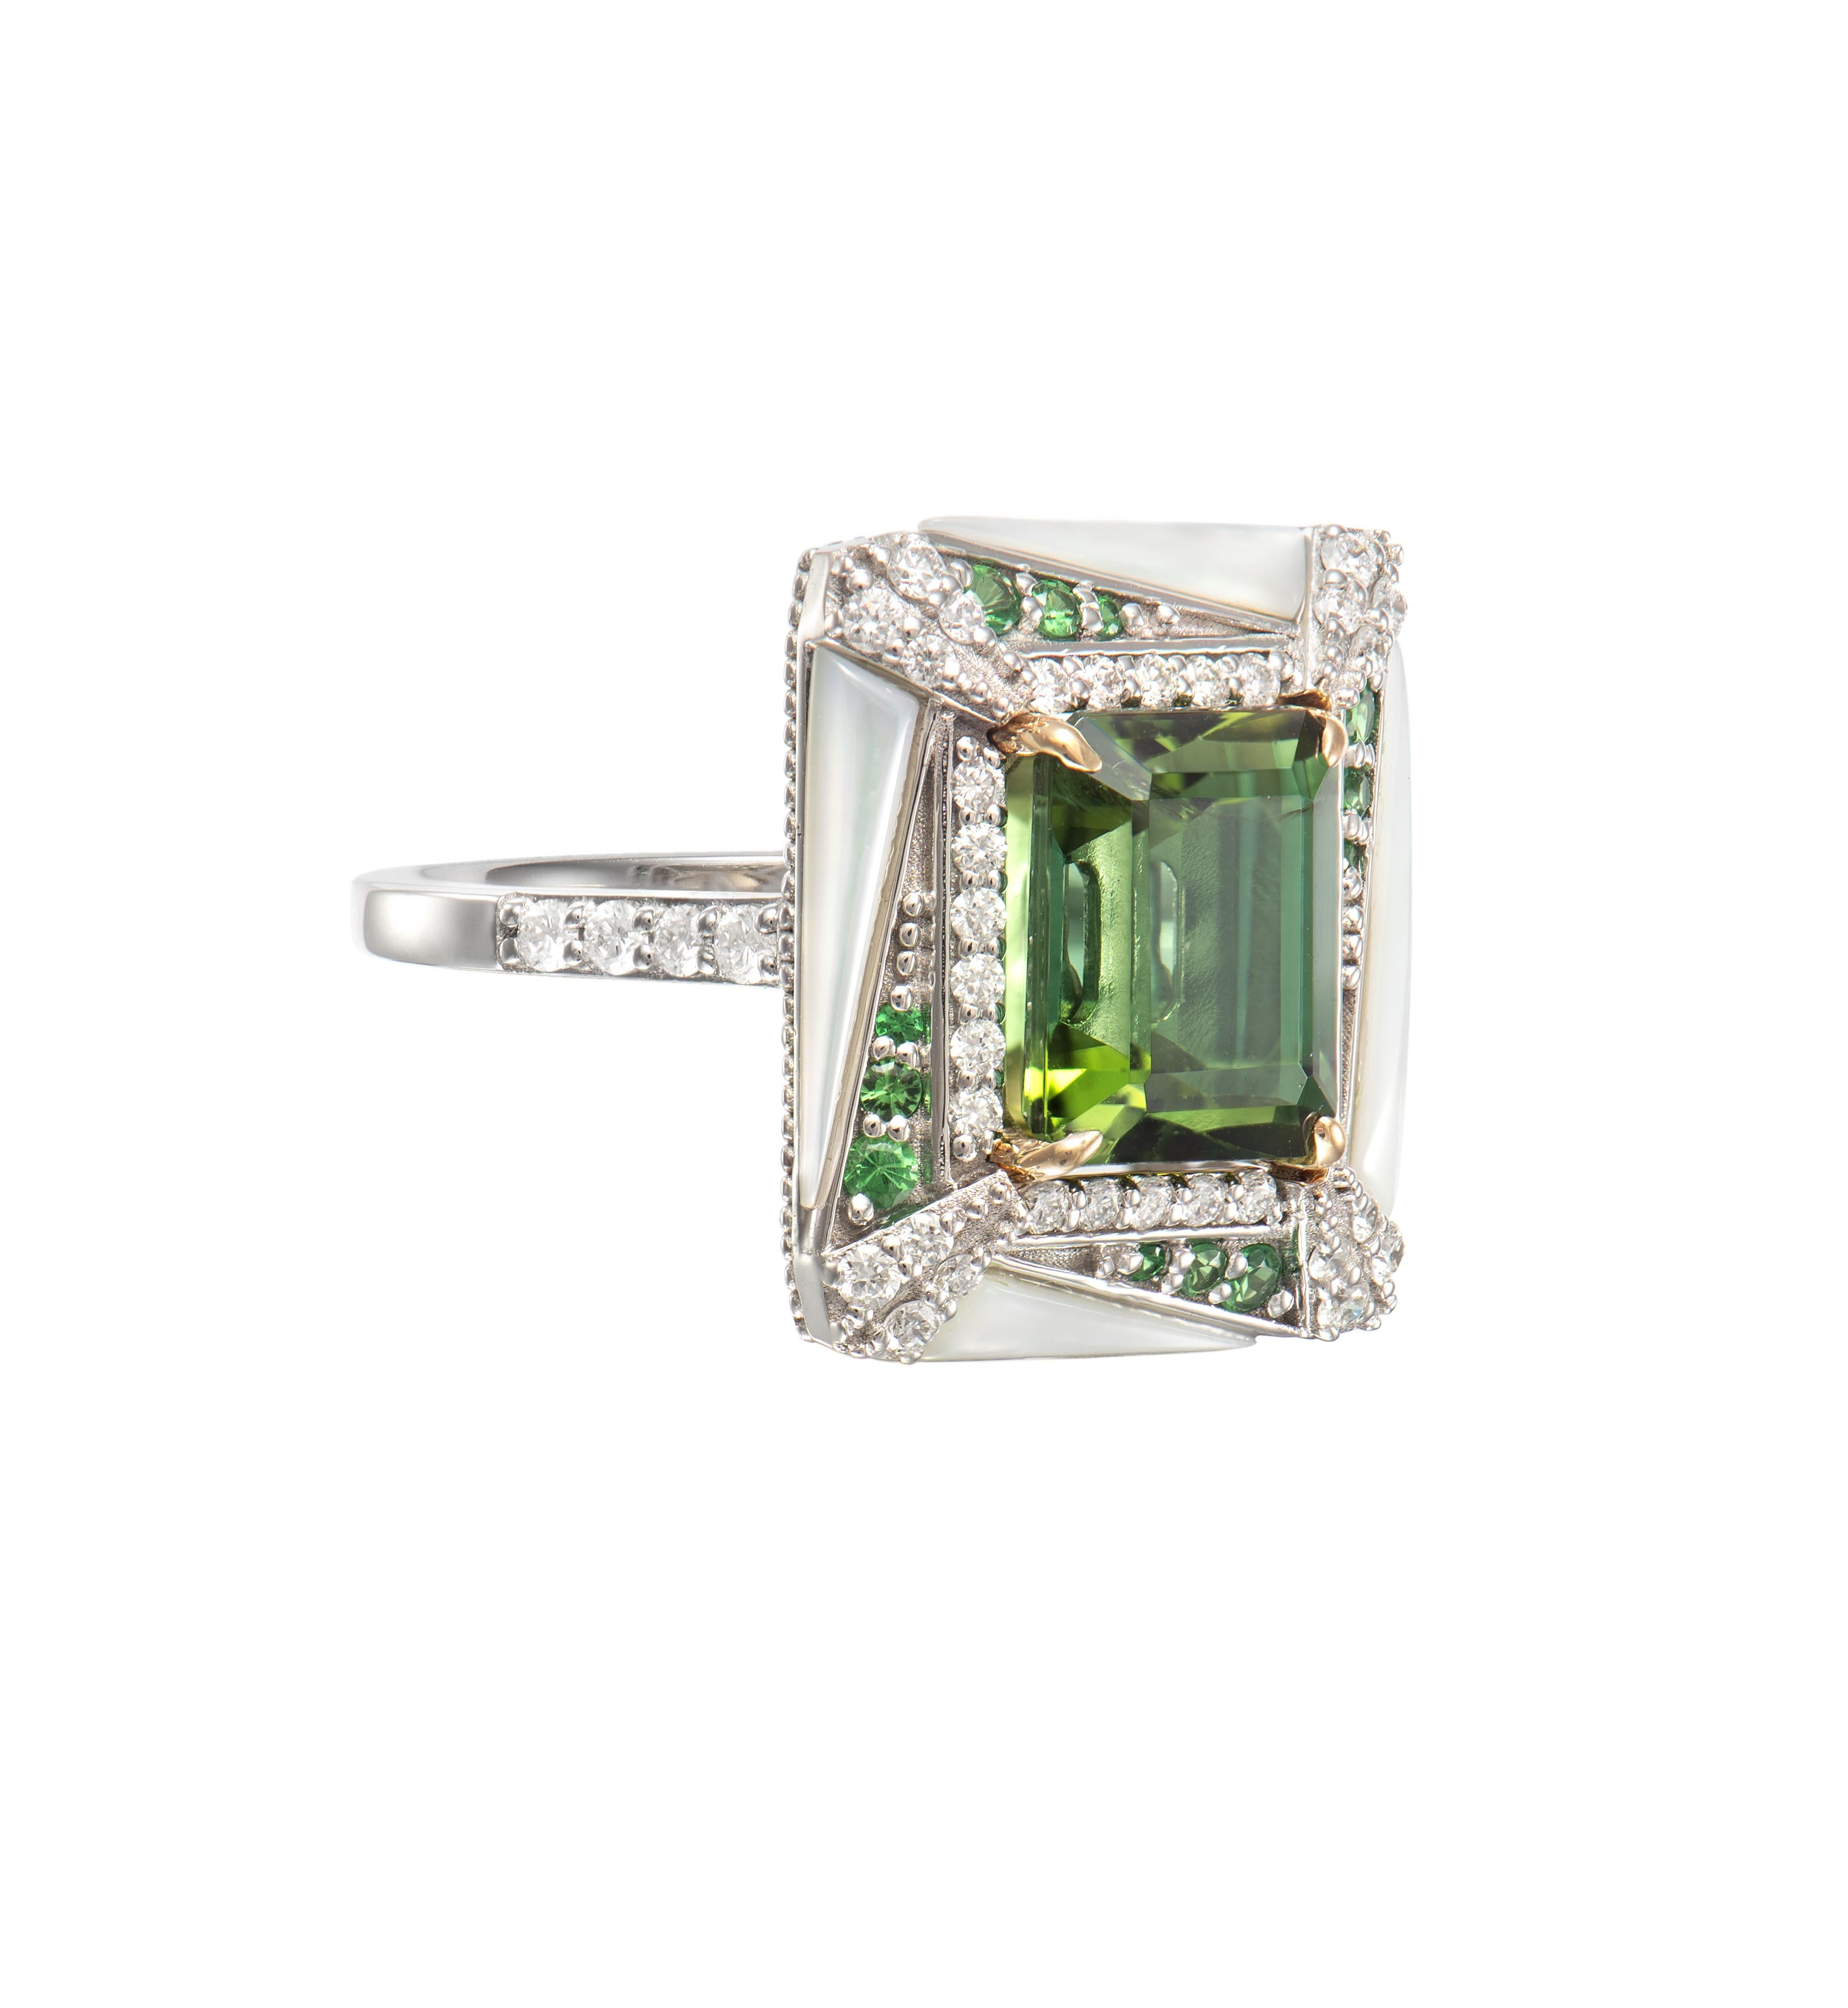 Mystic Green Tourmalines centred on an irregular frame of Tsavorites, Mother of Pearl and Diamonds. Combined with subtle gold detailing the tourmalines are hypnotising with its deep green hue.

Mystic Green Tourmaline Ring with Tsavorites, Mother of